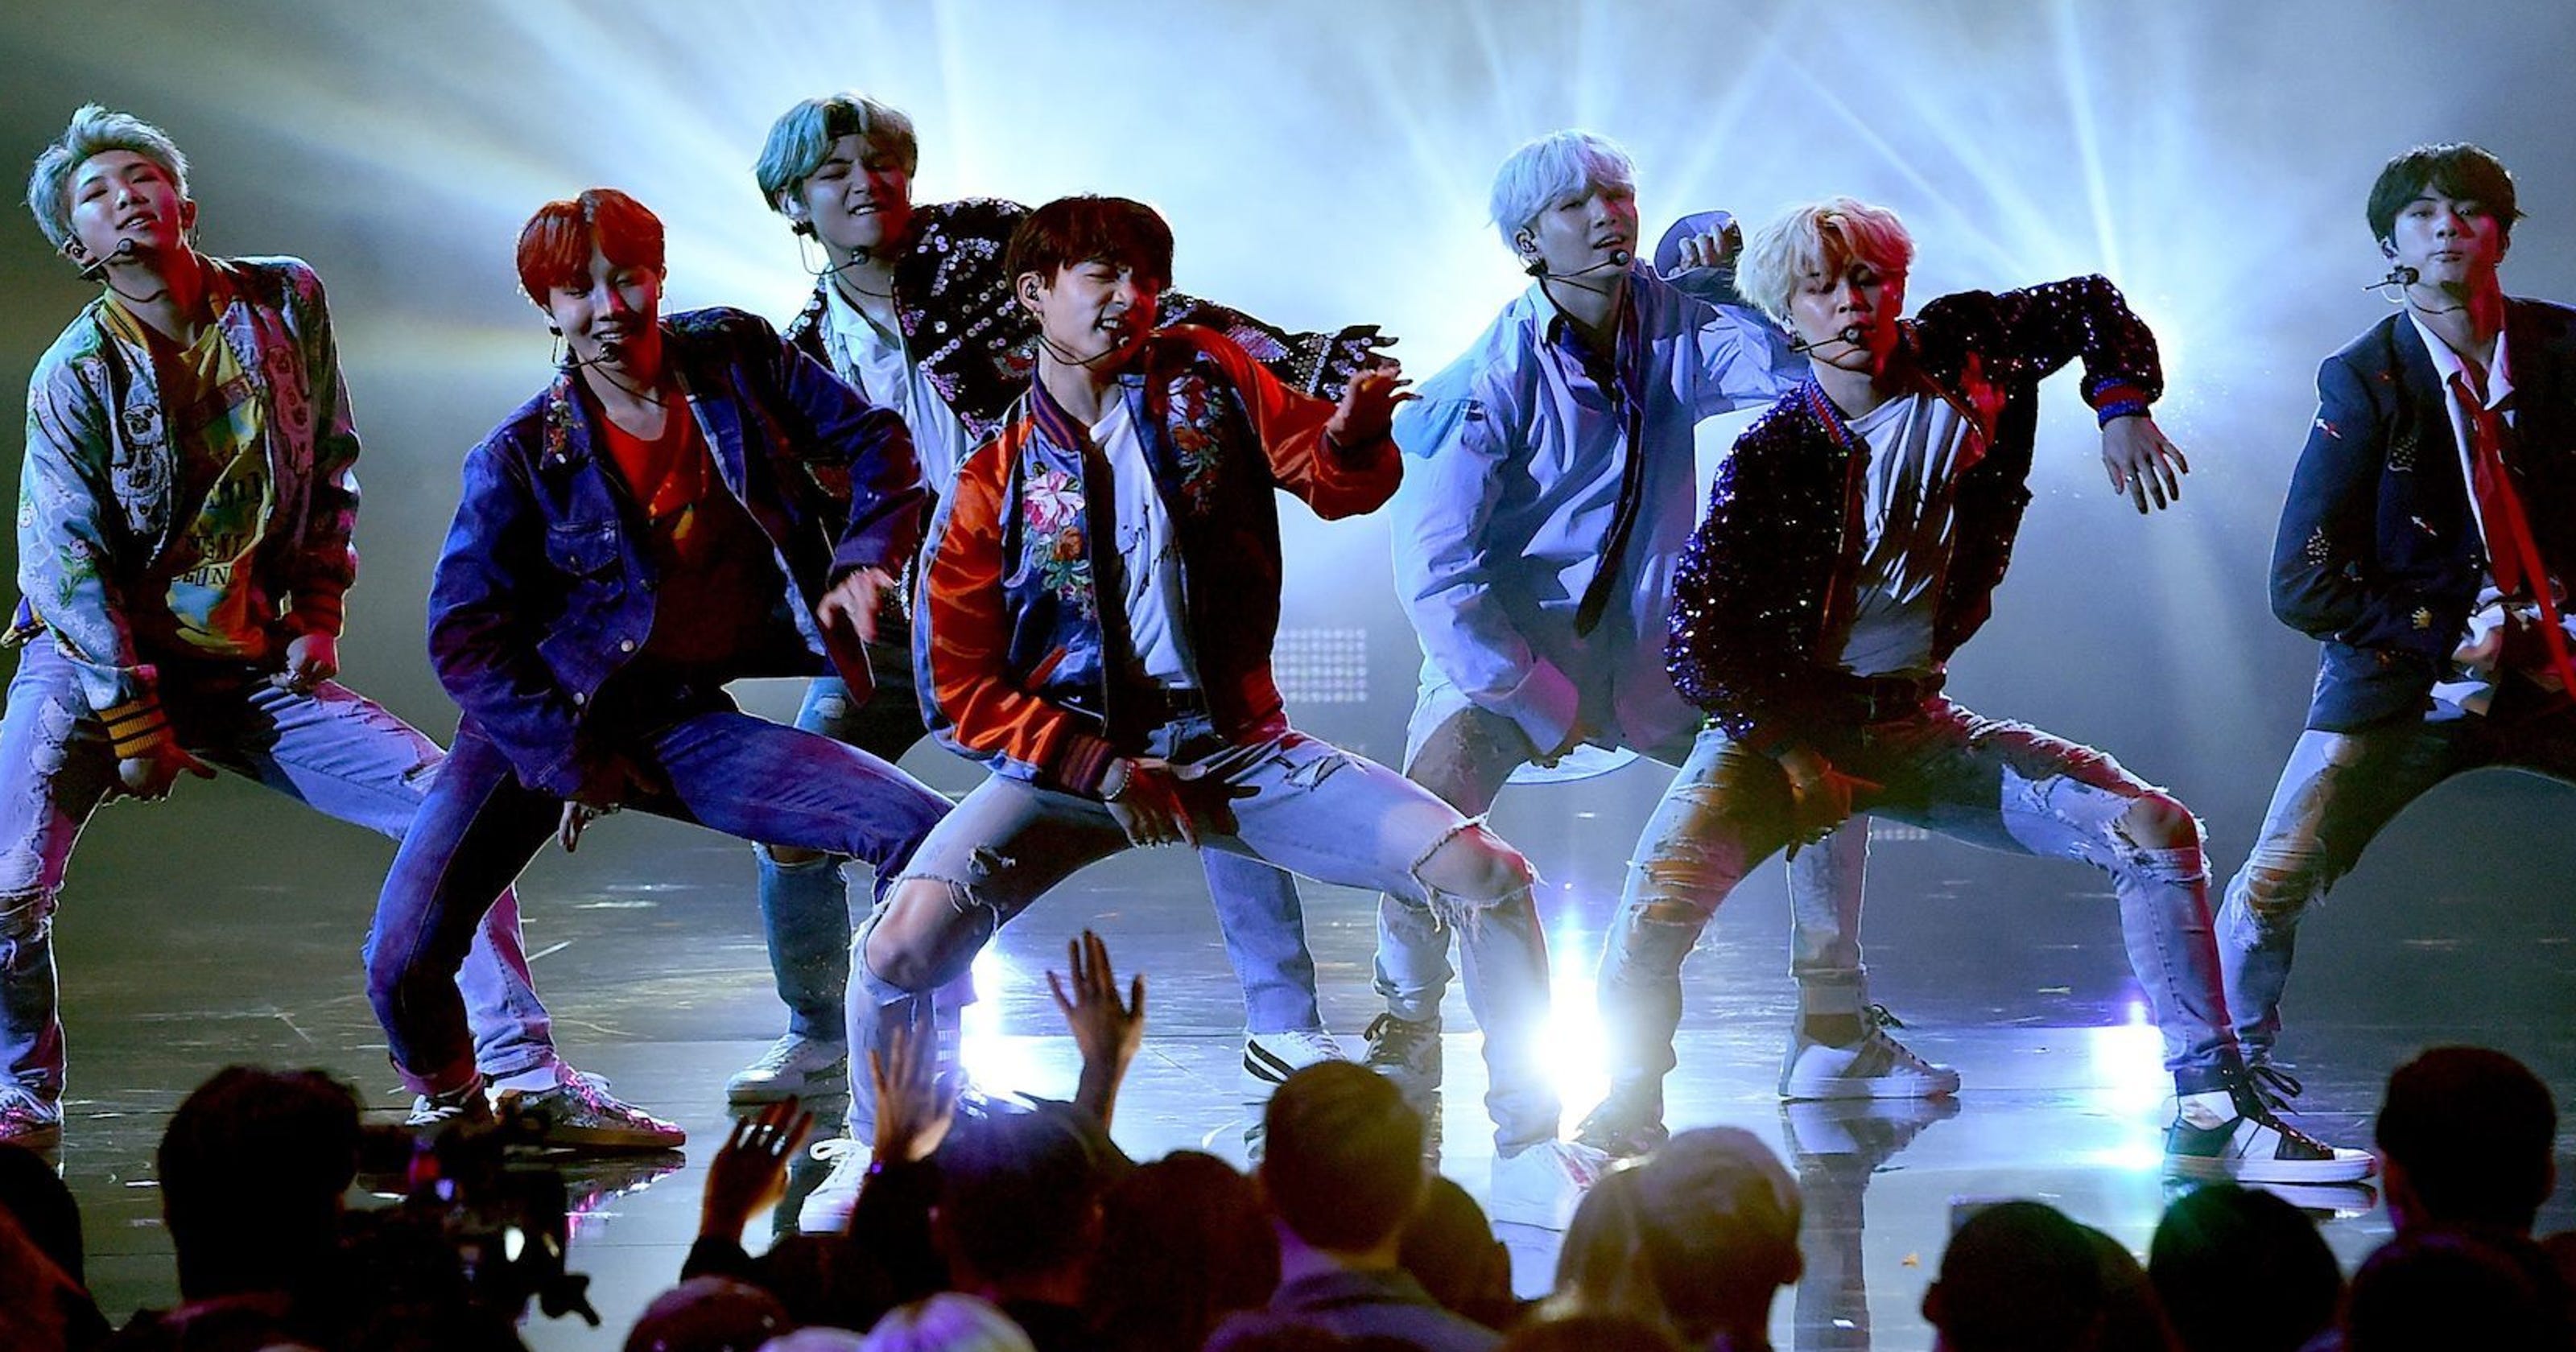 BTS at MetLife Stadium: Kpop to make debut on the big Jersey stage TICKET INFO